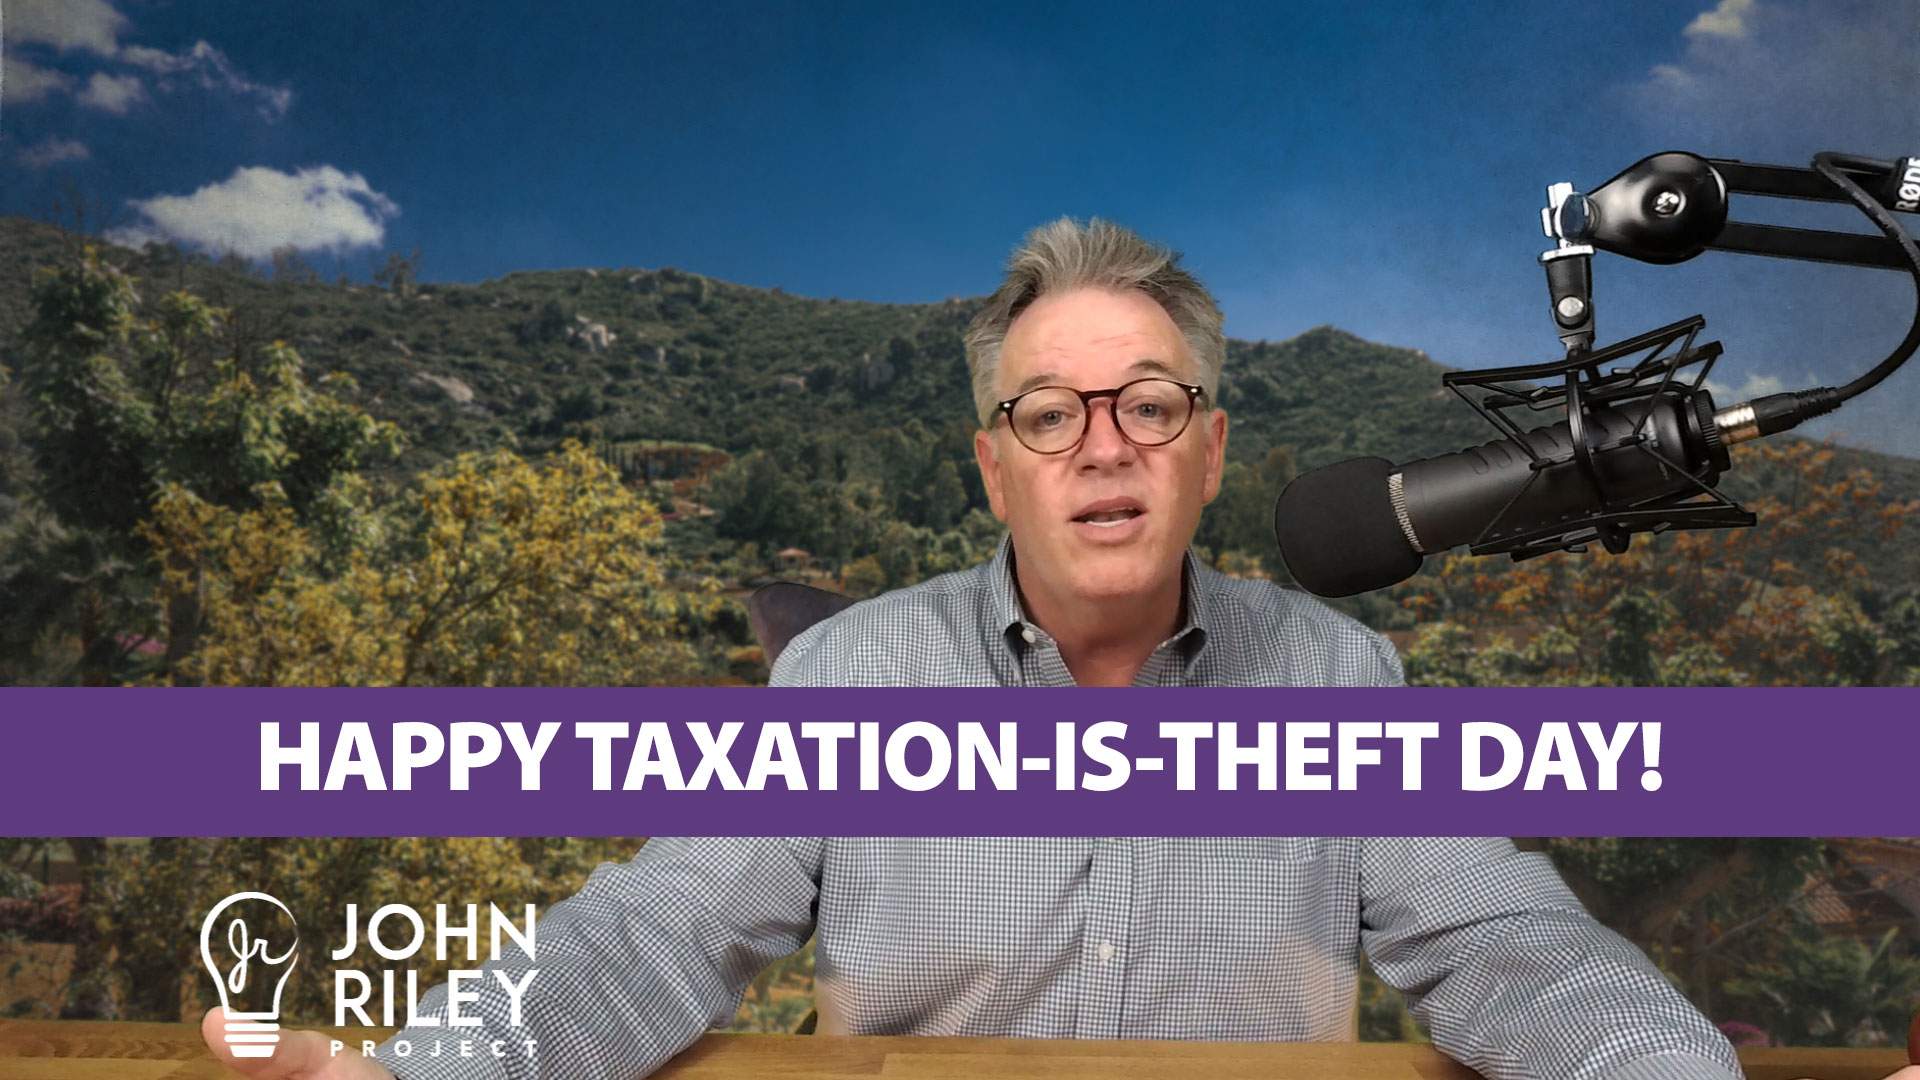 Happy Taxation-is-Theft Day John Riley Project